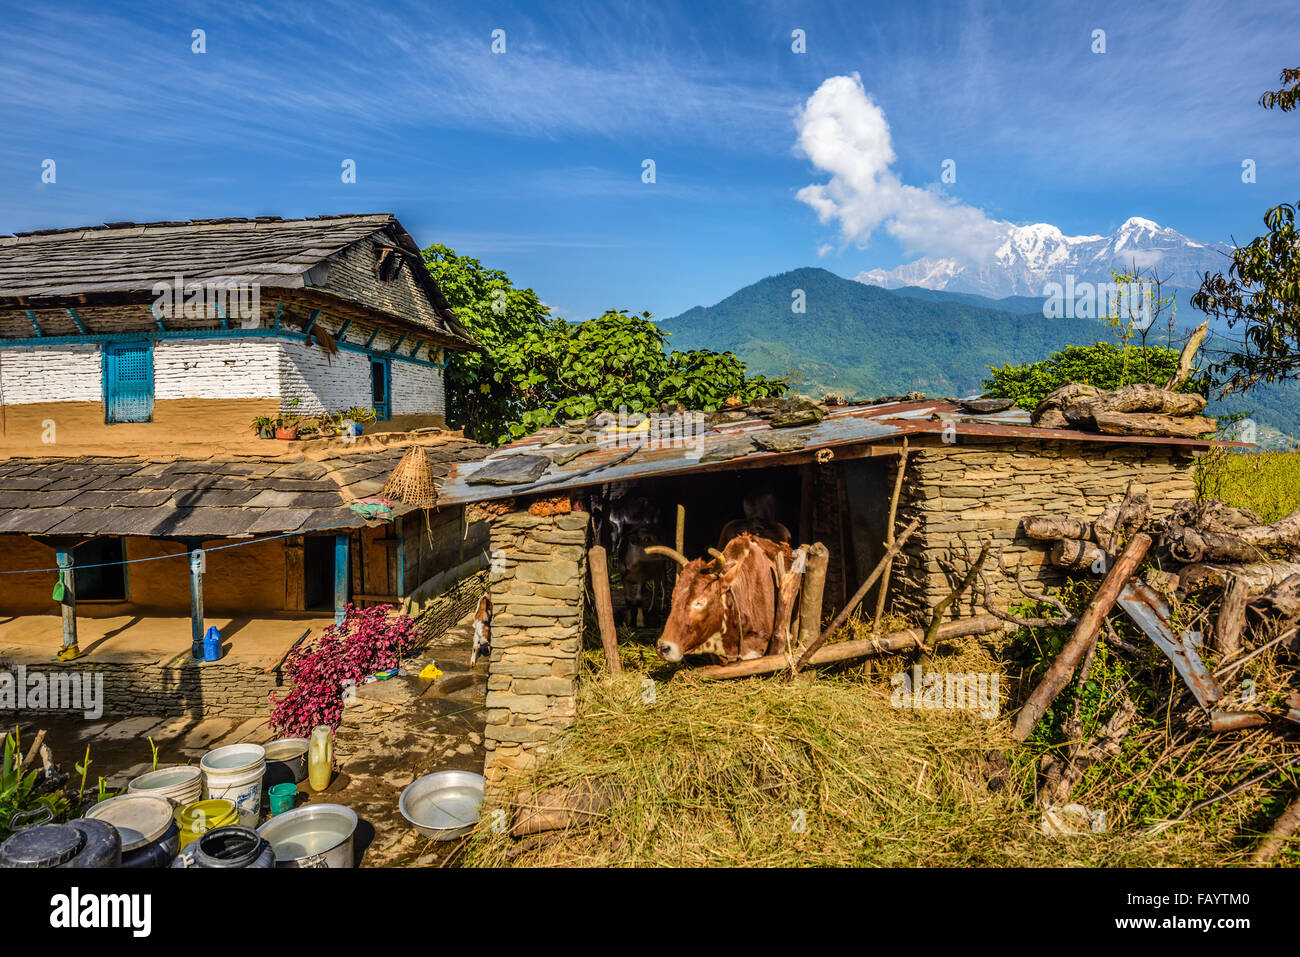 Panoramic view of the Himalayas mountains, a farmhouse and a stall near Pokhara in Nepal Stock Photo